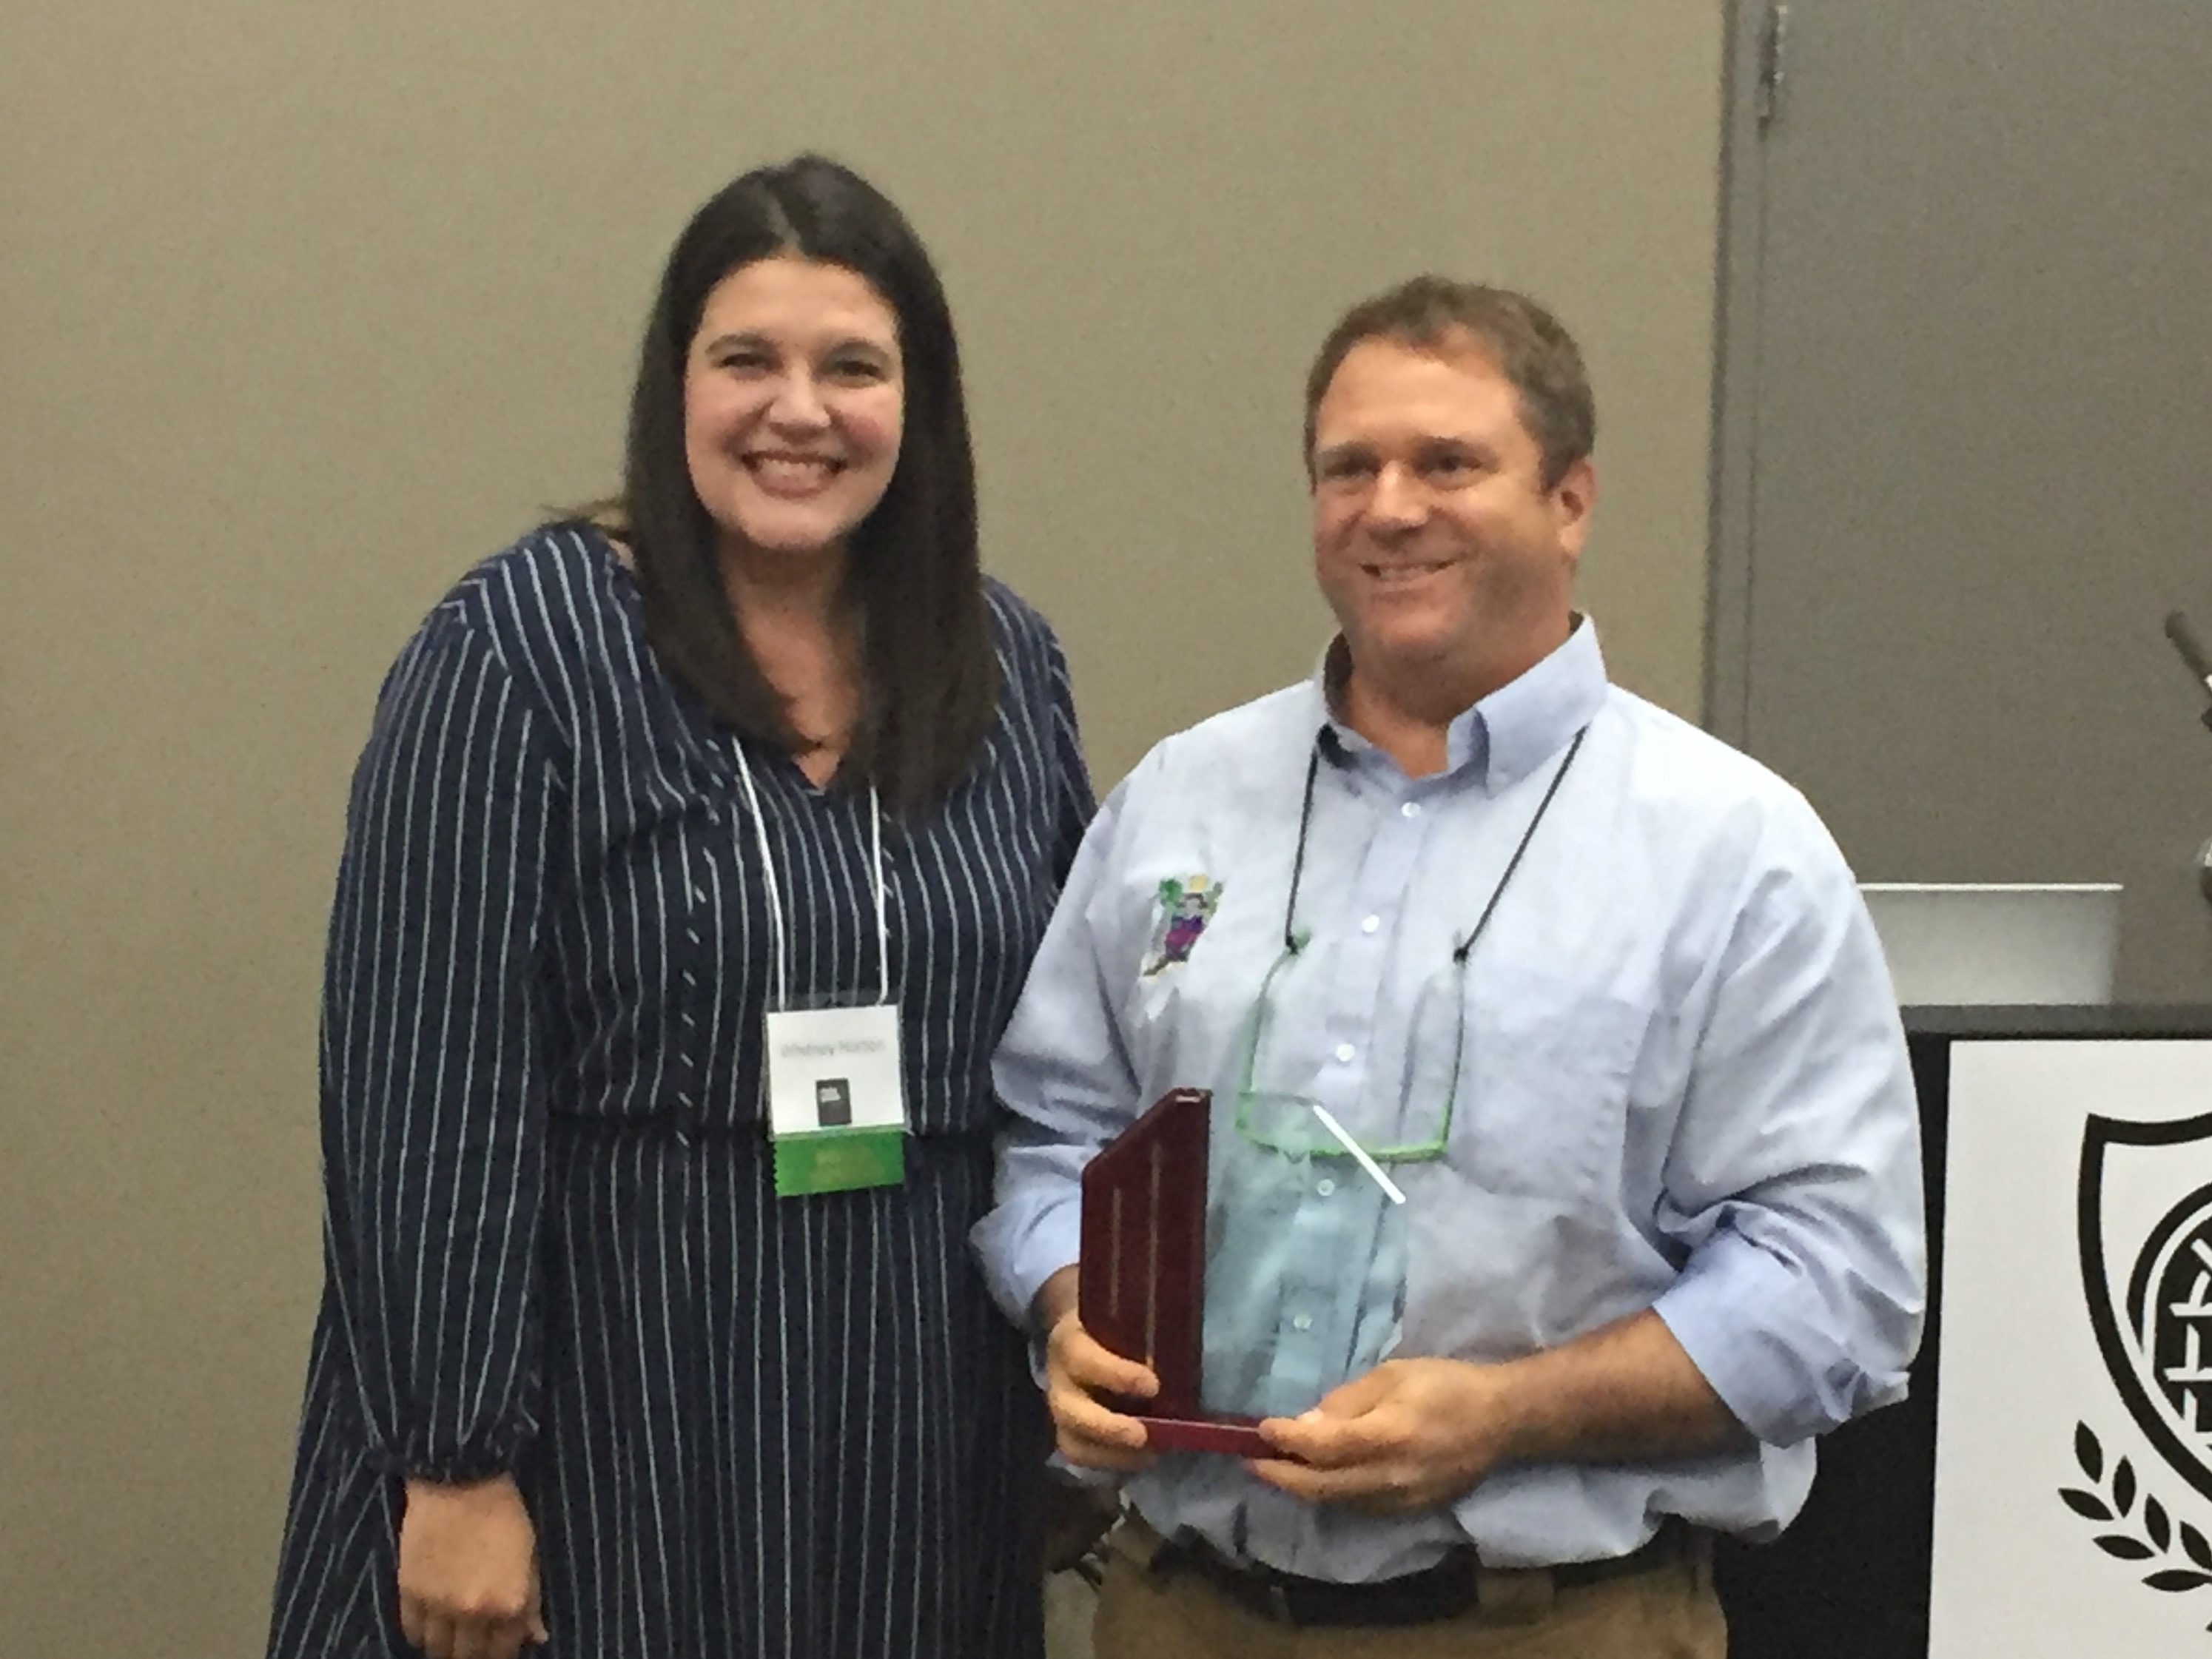 Ed Levy is presented with an award from Whitney Horton, Vice President of the Arkansas Community Development Society.